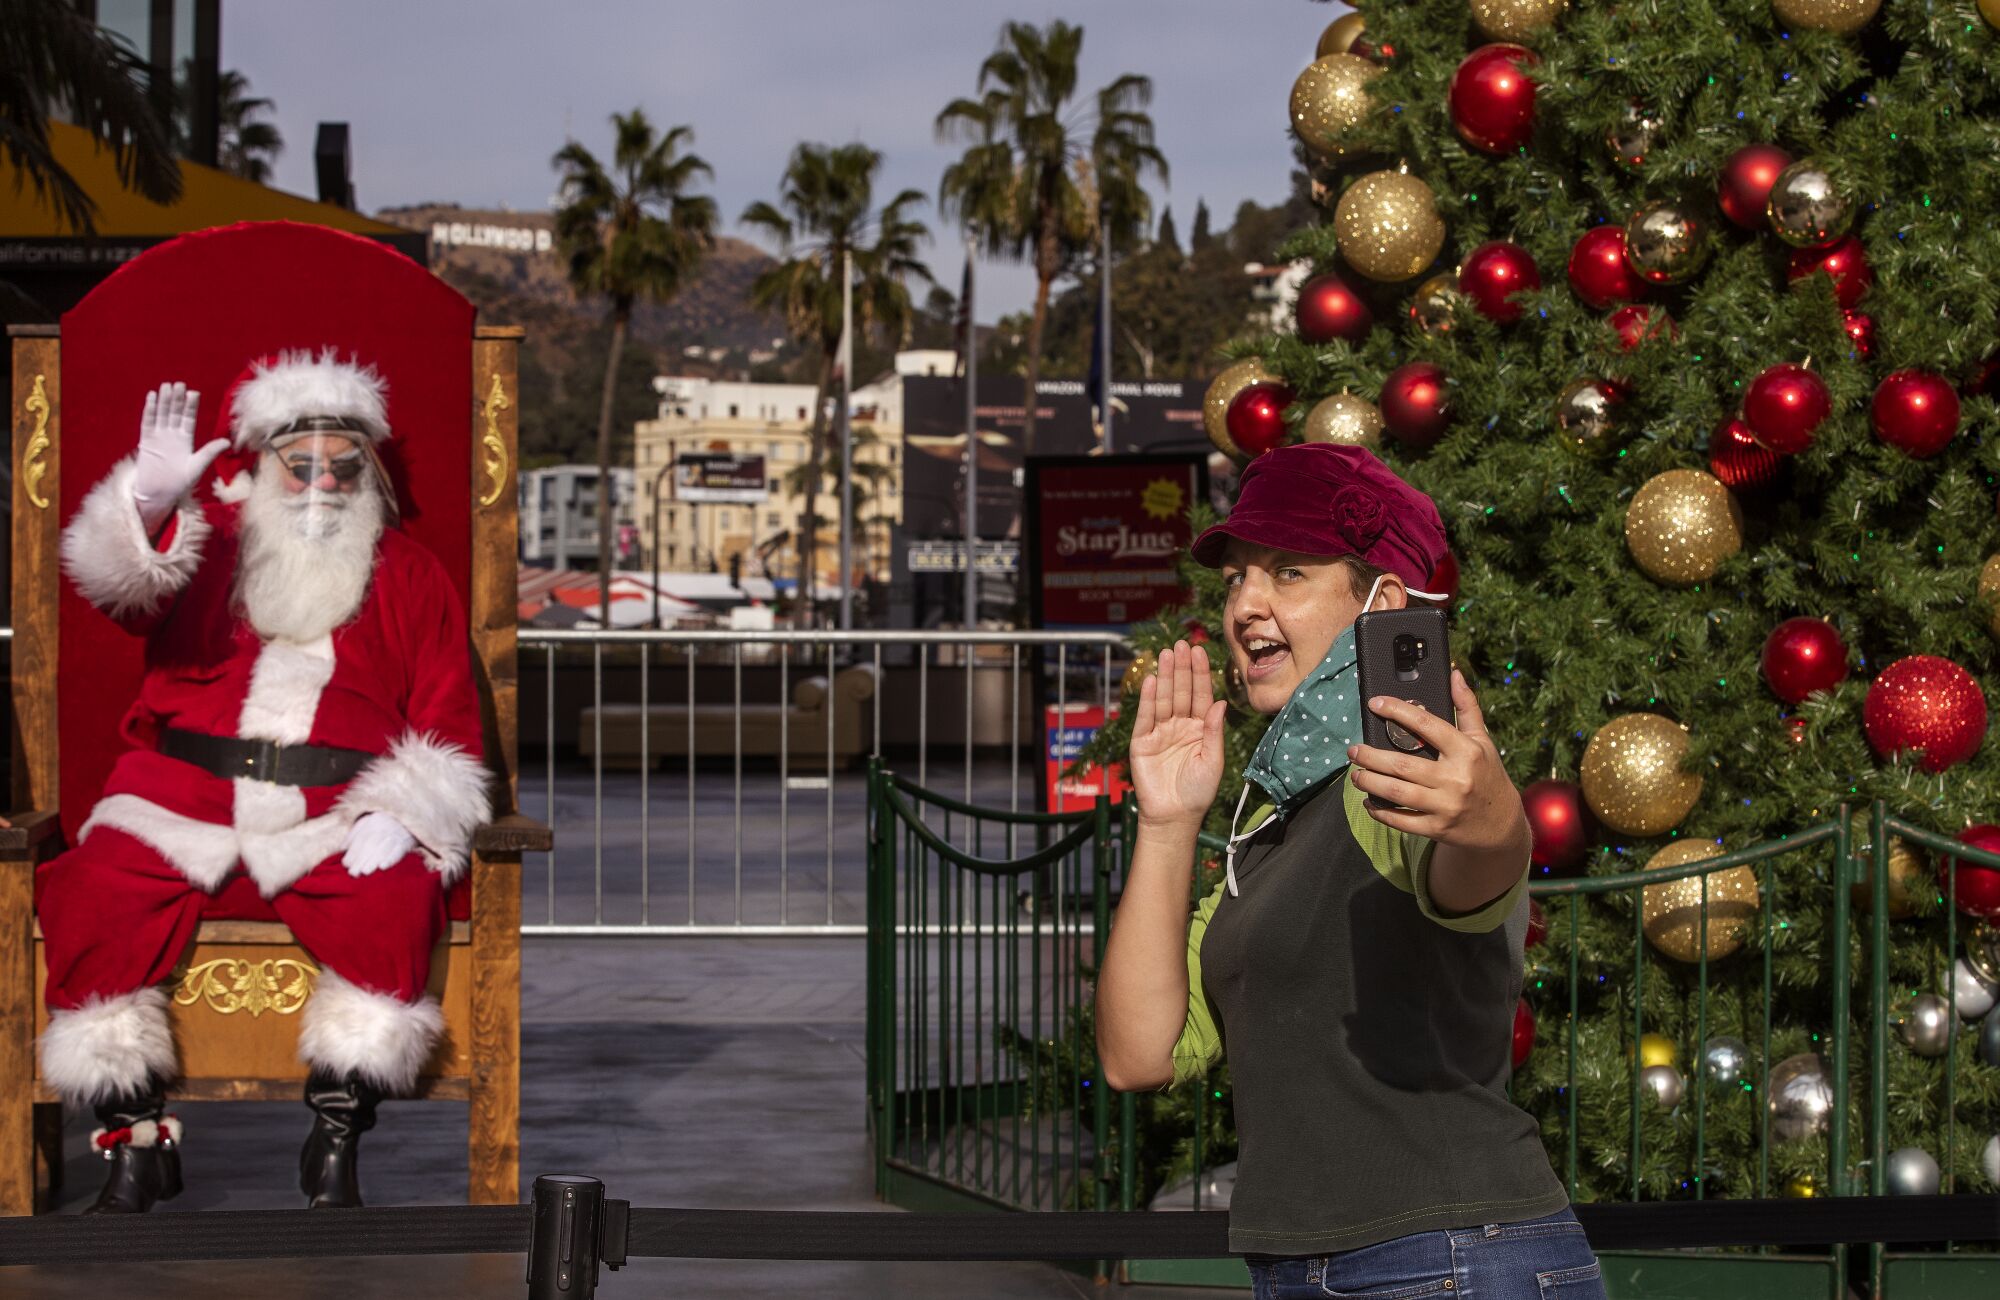 Nora Vetter takes a selfie with Santa